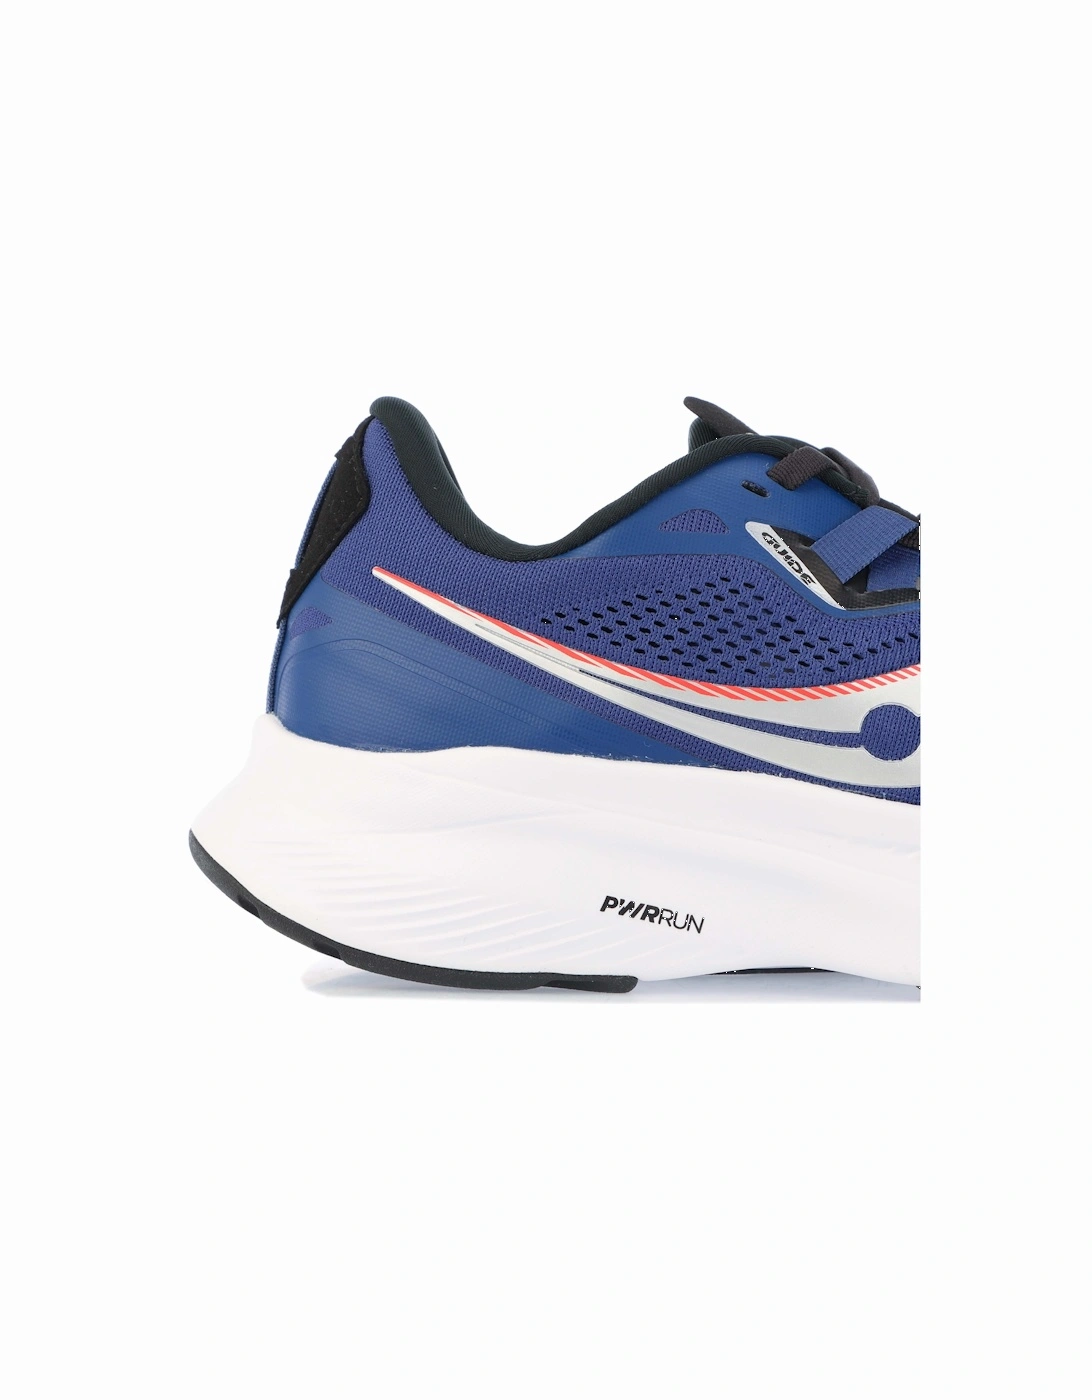 Mens Guide 15 Running Shoes